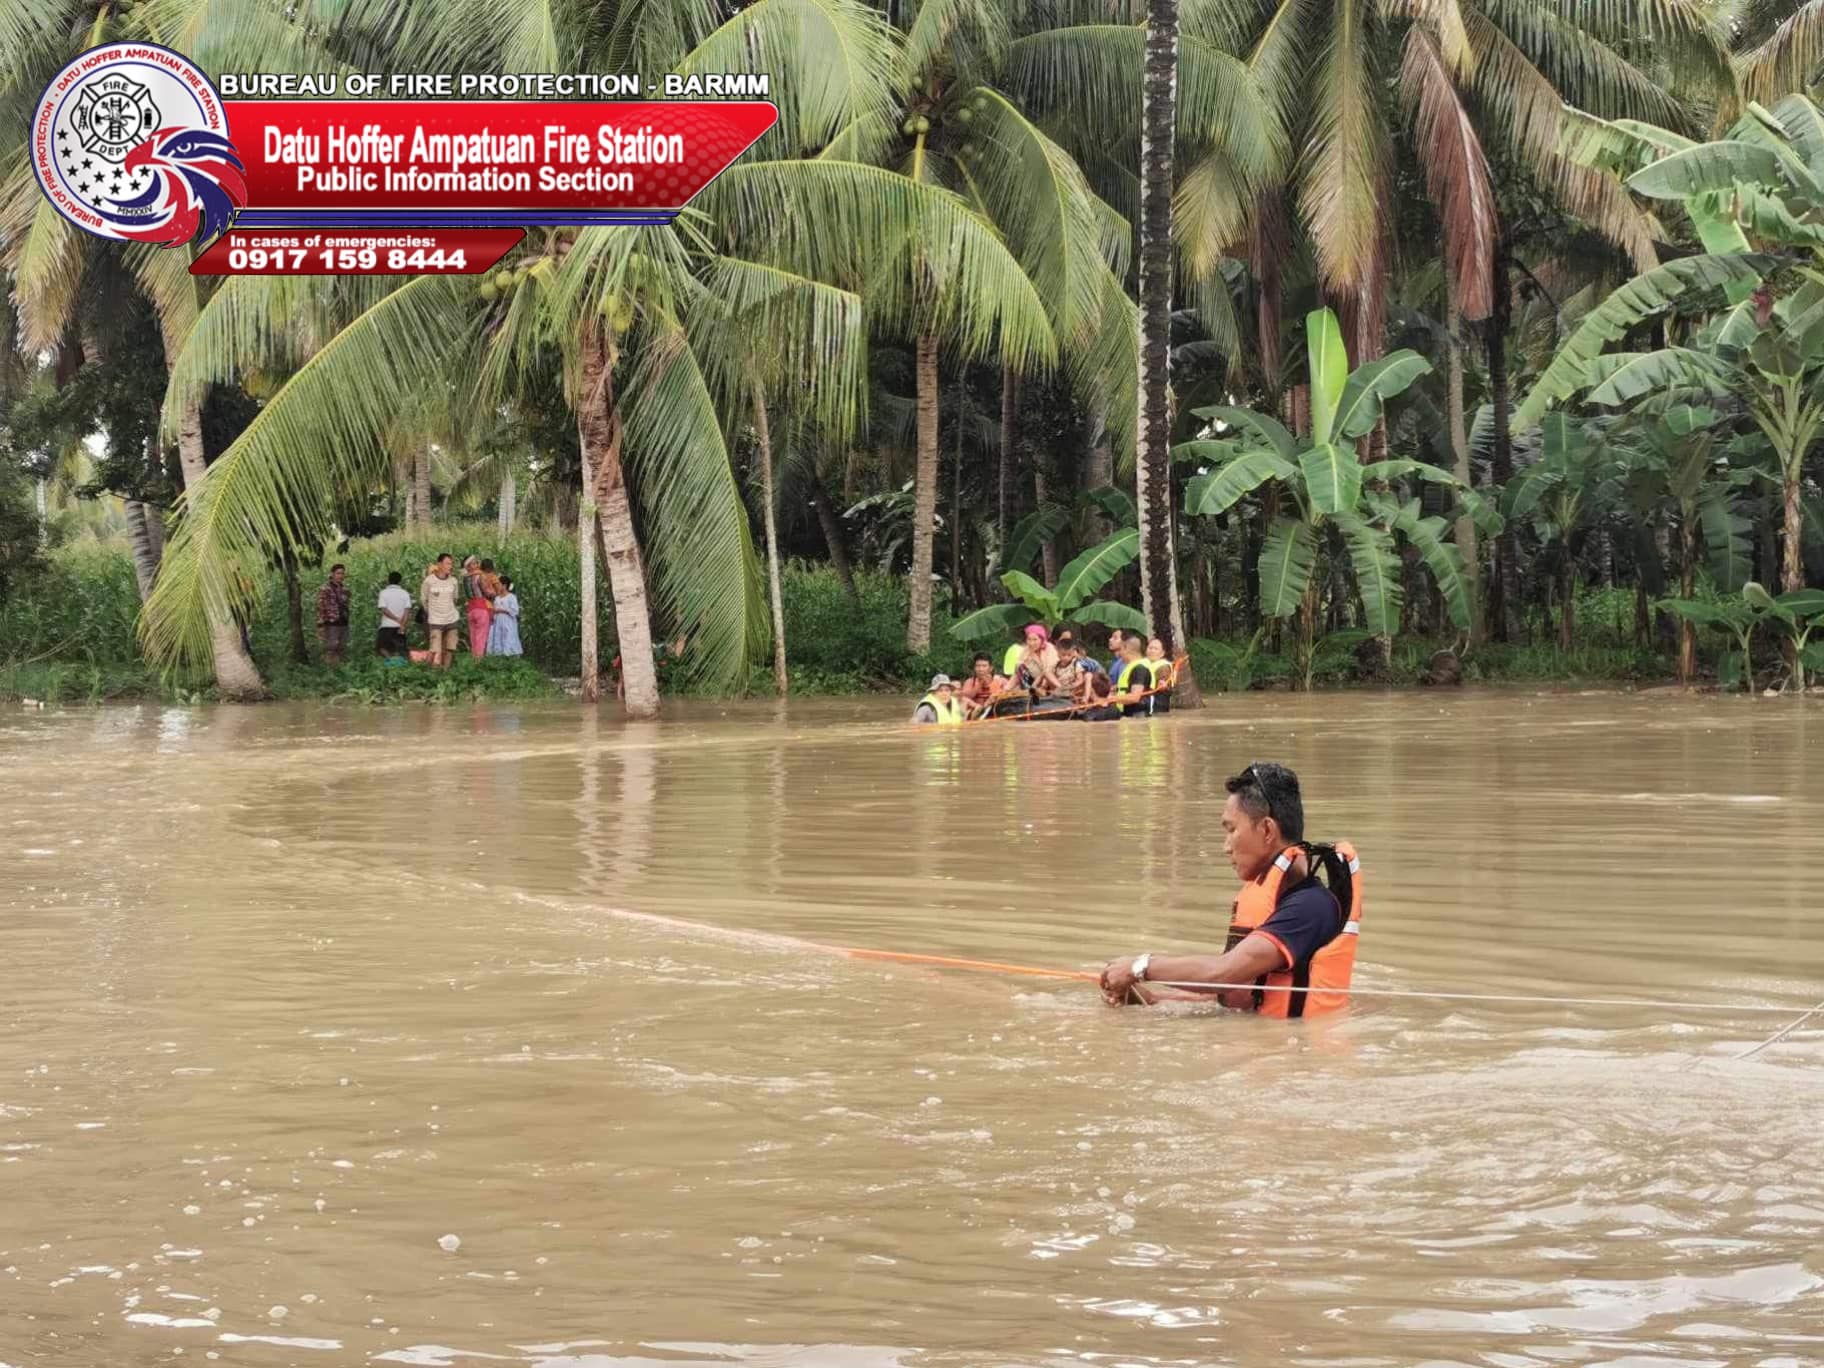 Rescue workers make improvised watercraft in rescuing trapped civilians in Datu Hofer, Maguindanao del Sur as the Labu-Labu river overflowed Friday night.